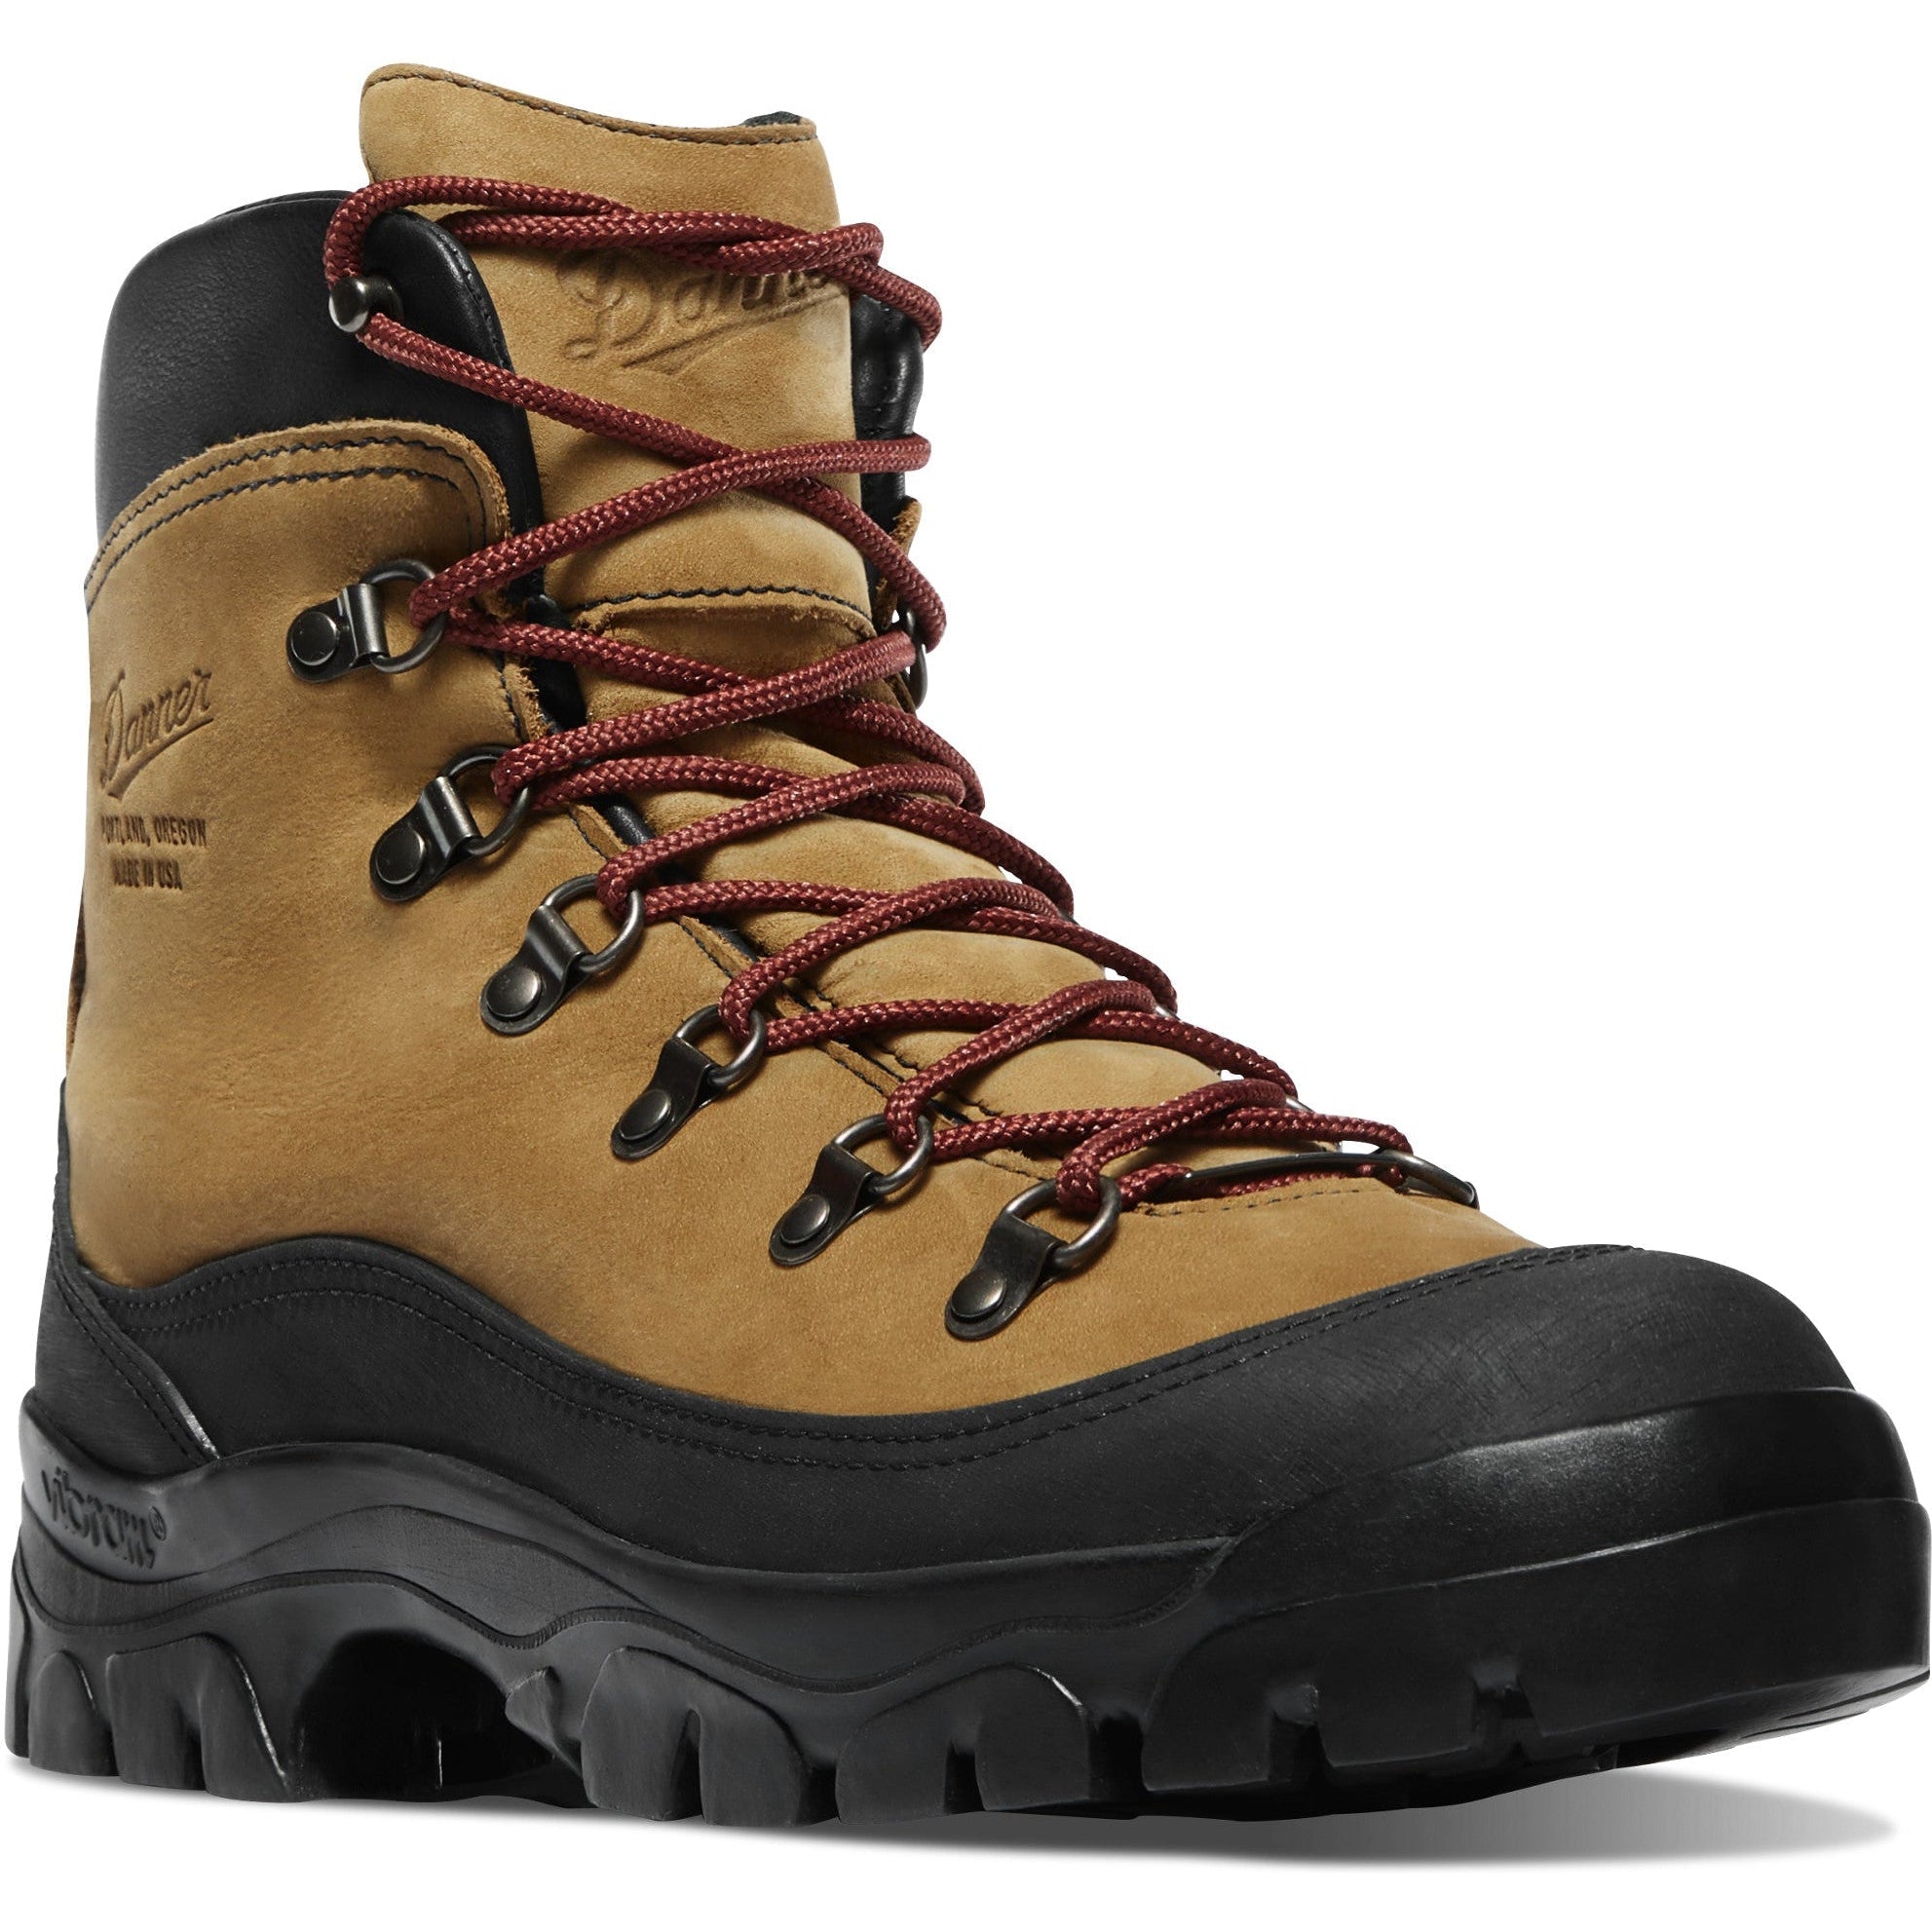 Danner Women's Crater 6" WP Made in USA Hiking Boot - Brown - 37414 5.5 / Medium / Brown - Overlook Boots